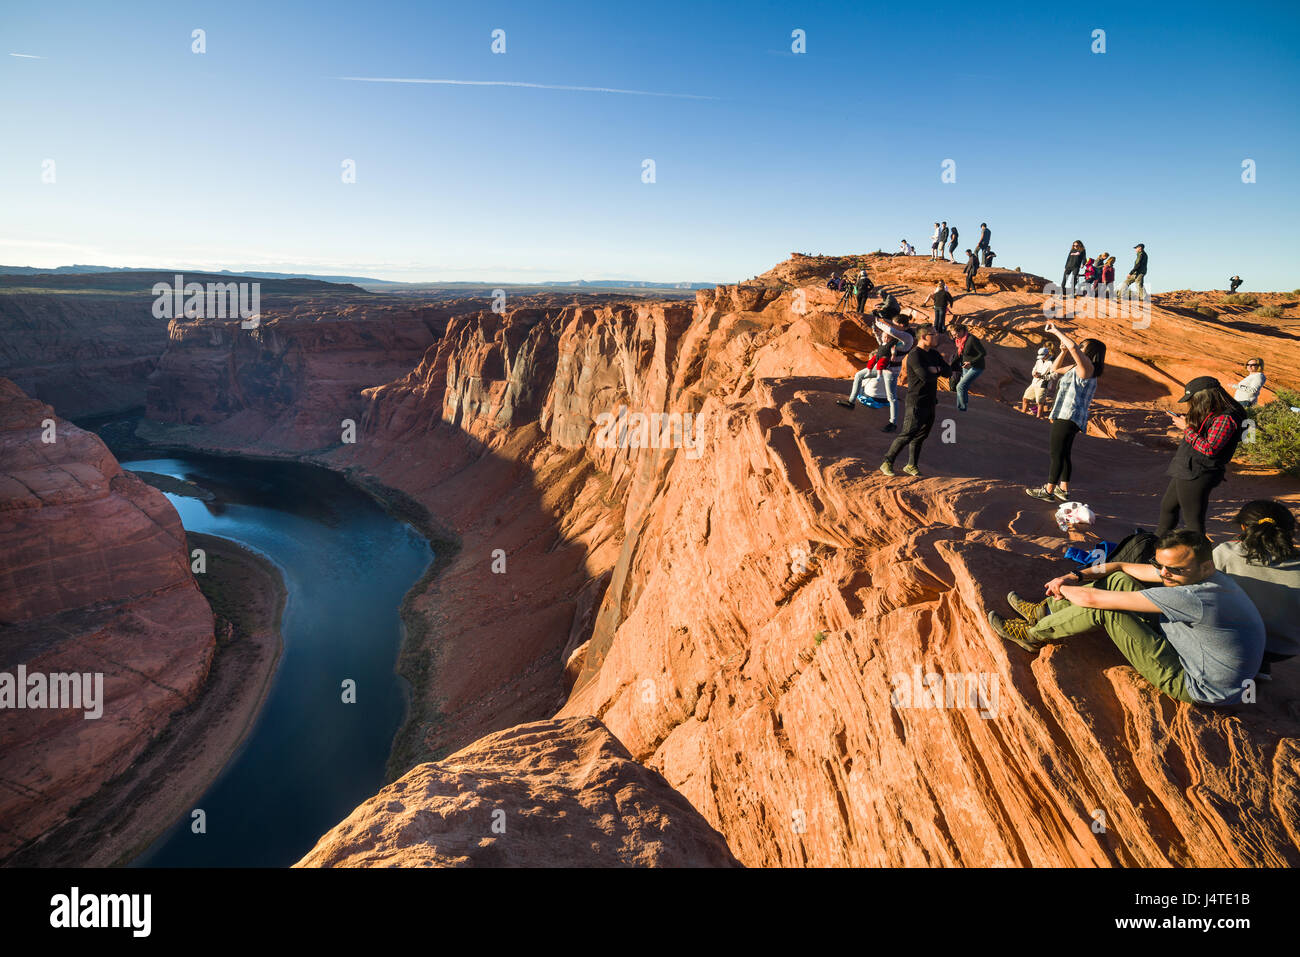 Tourists Admiring The View At Horseshoe Bend at sunset with the Colorado river in shadow, Arizona Stock Photo